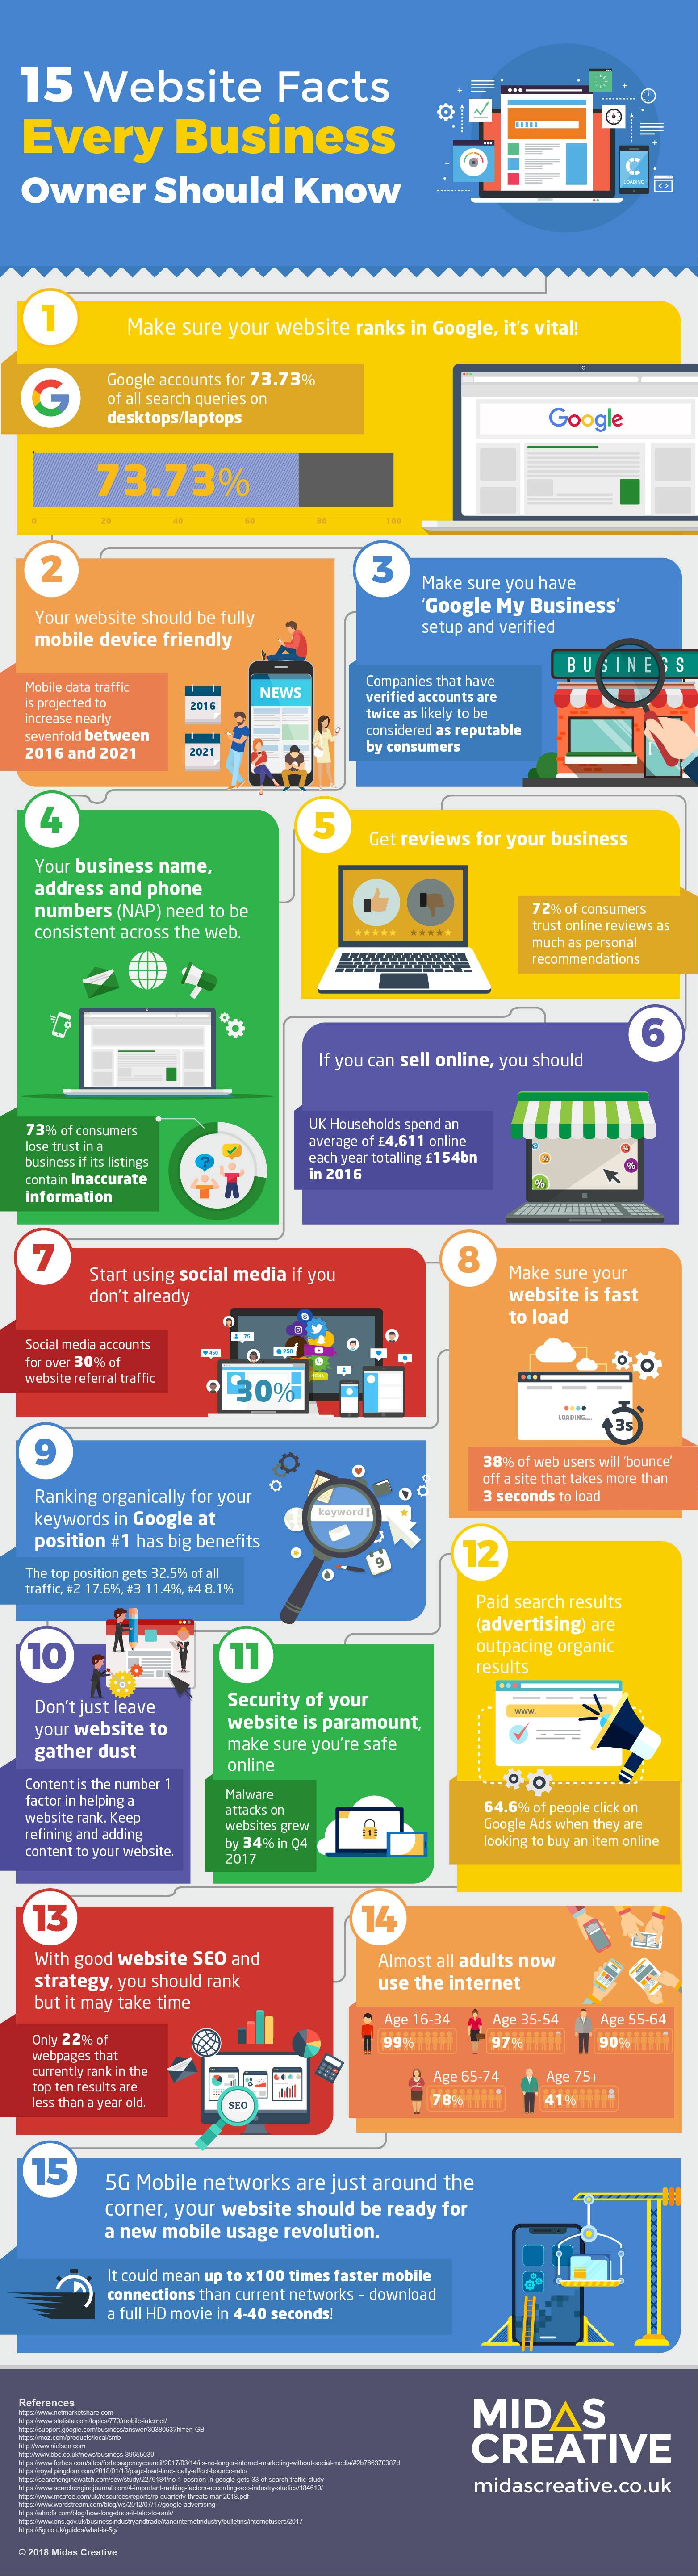 15-website-facts-every-business-owner-should-know-infographic-plaza